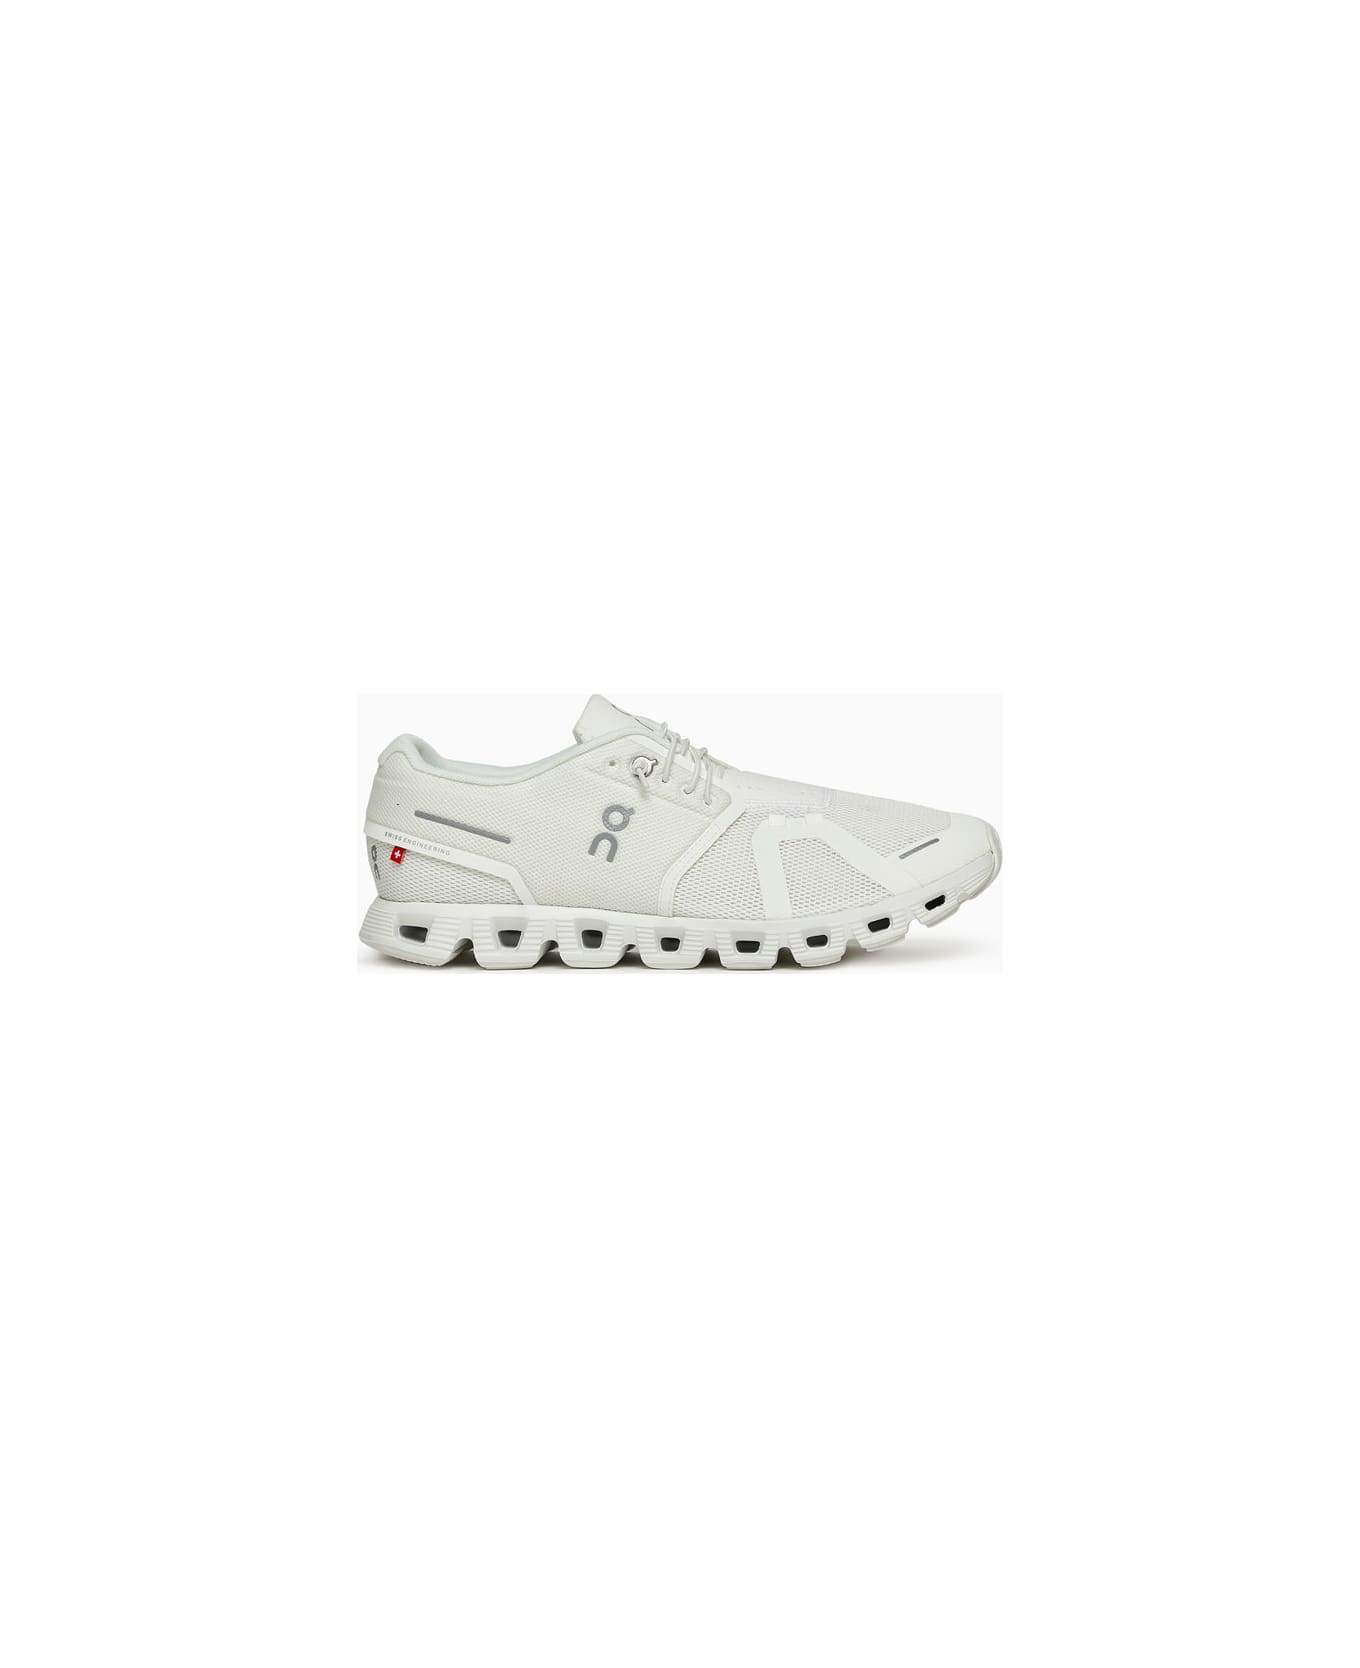 ON Sneakers On Cloud 5 59.98376 - WHITE